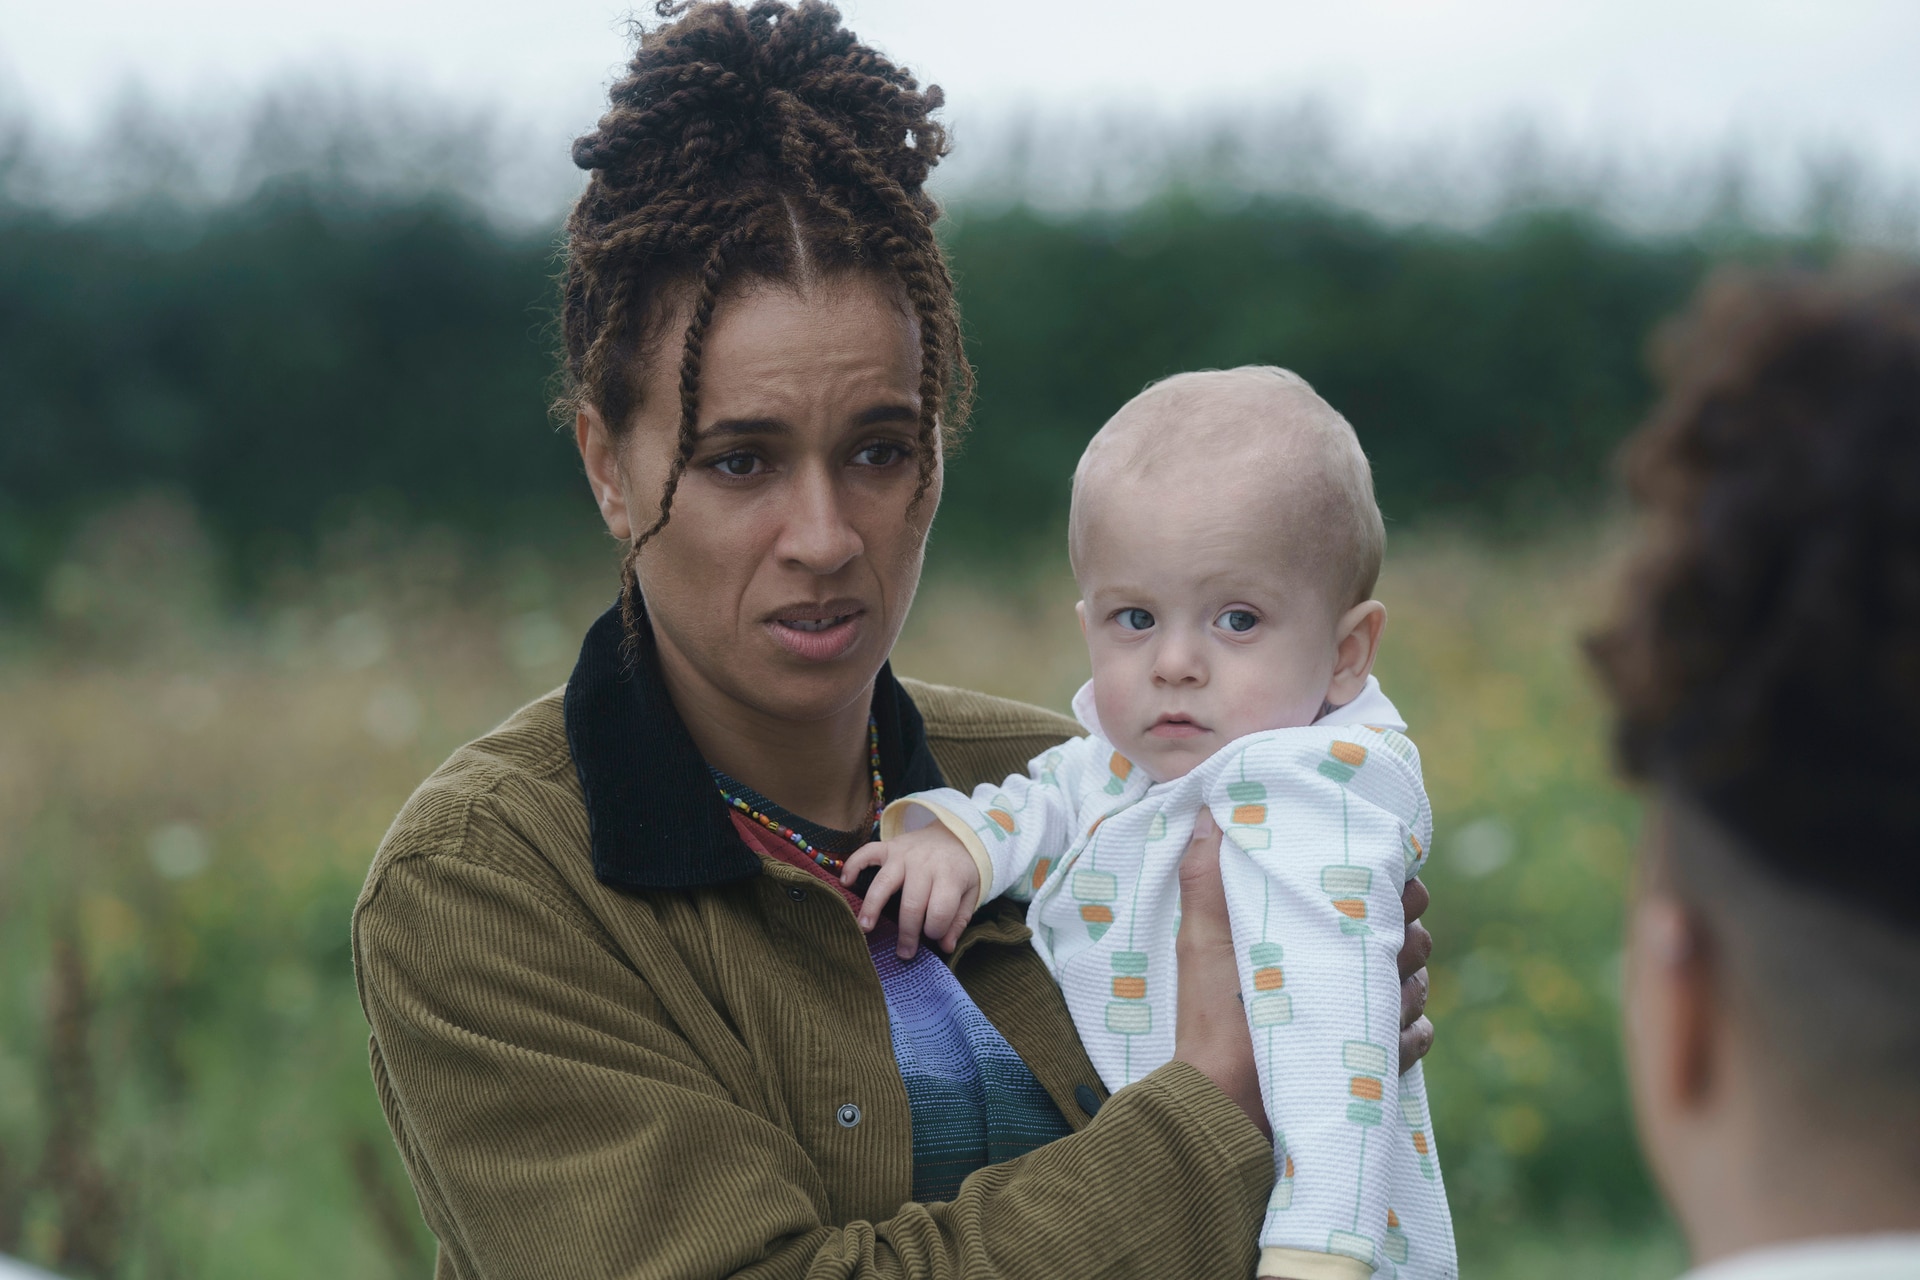 ‘The Baby’ trailer reveals having a murderous baby is tough